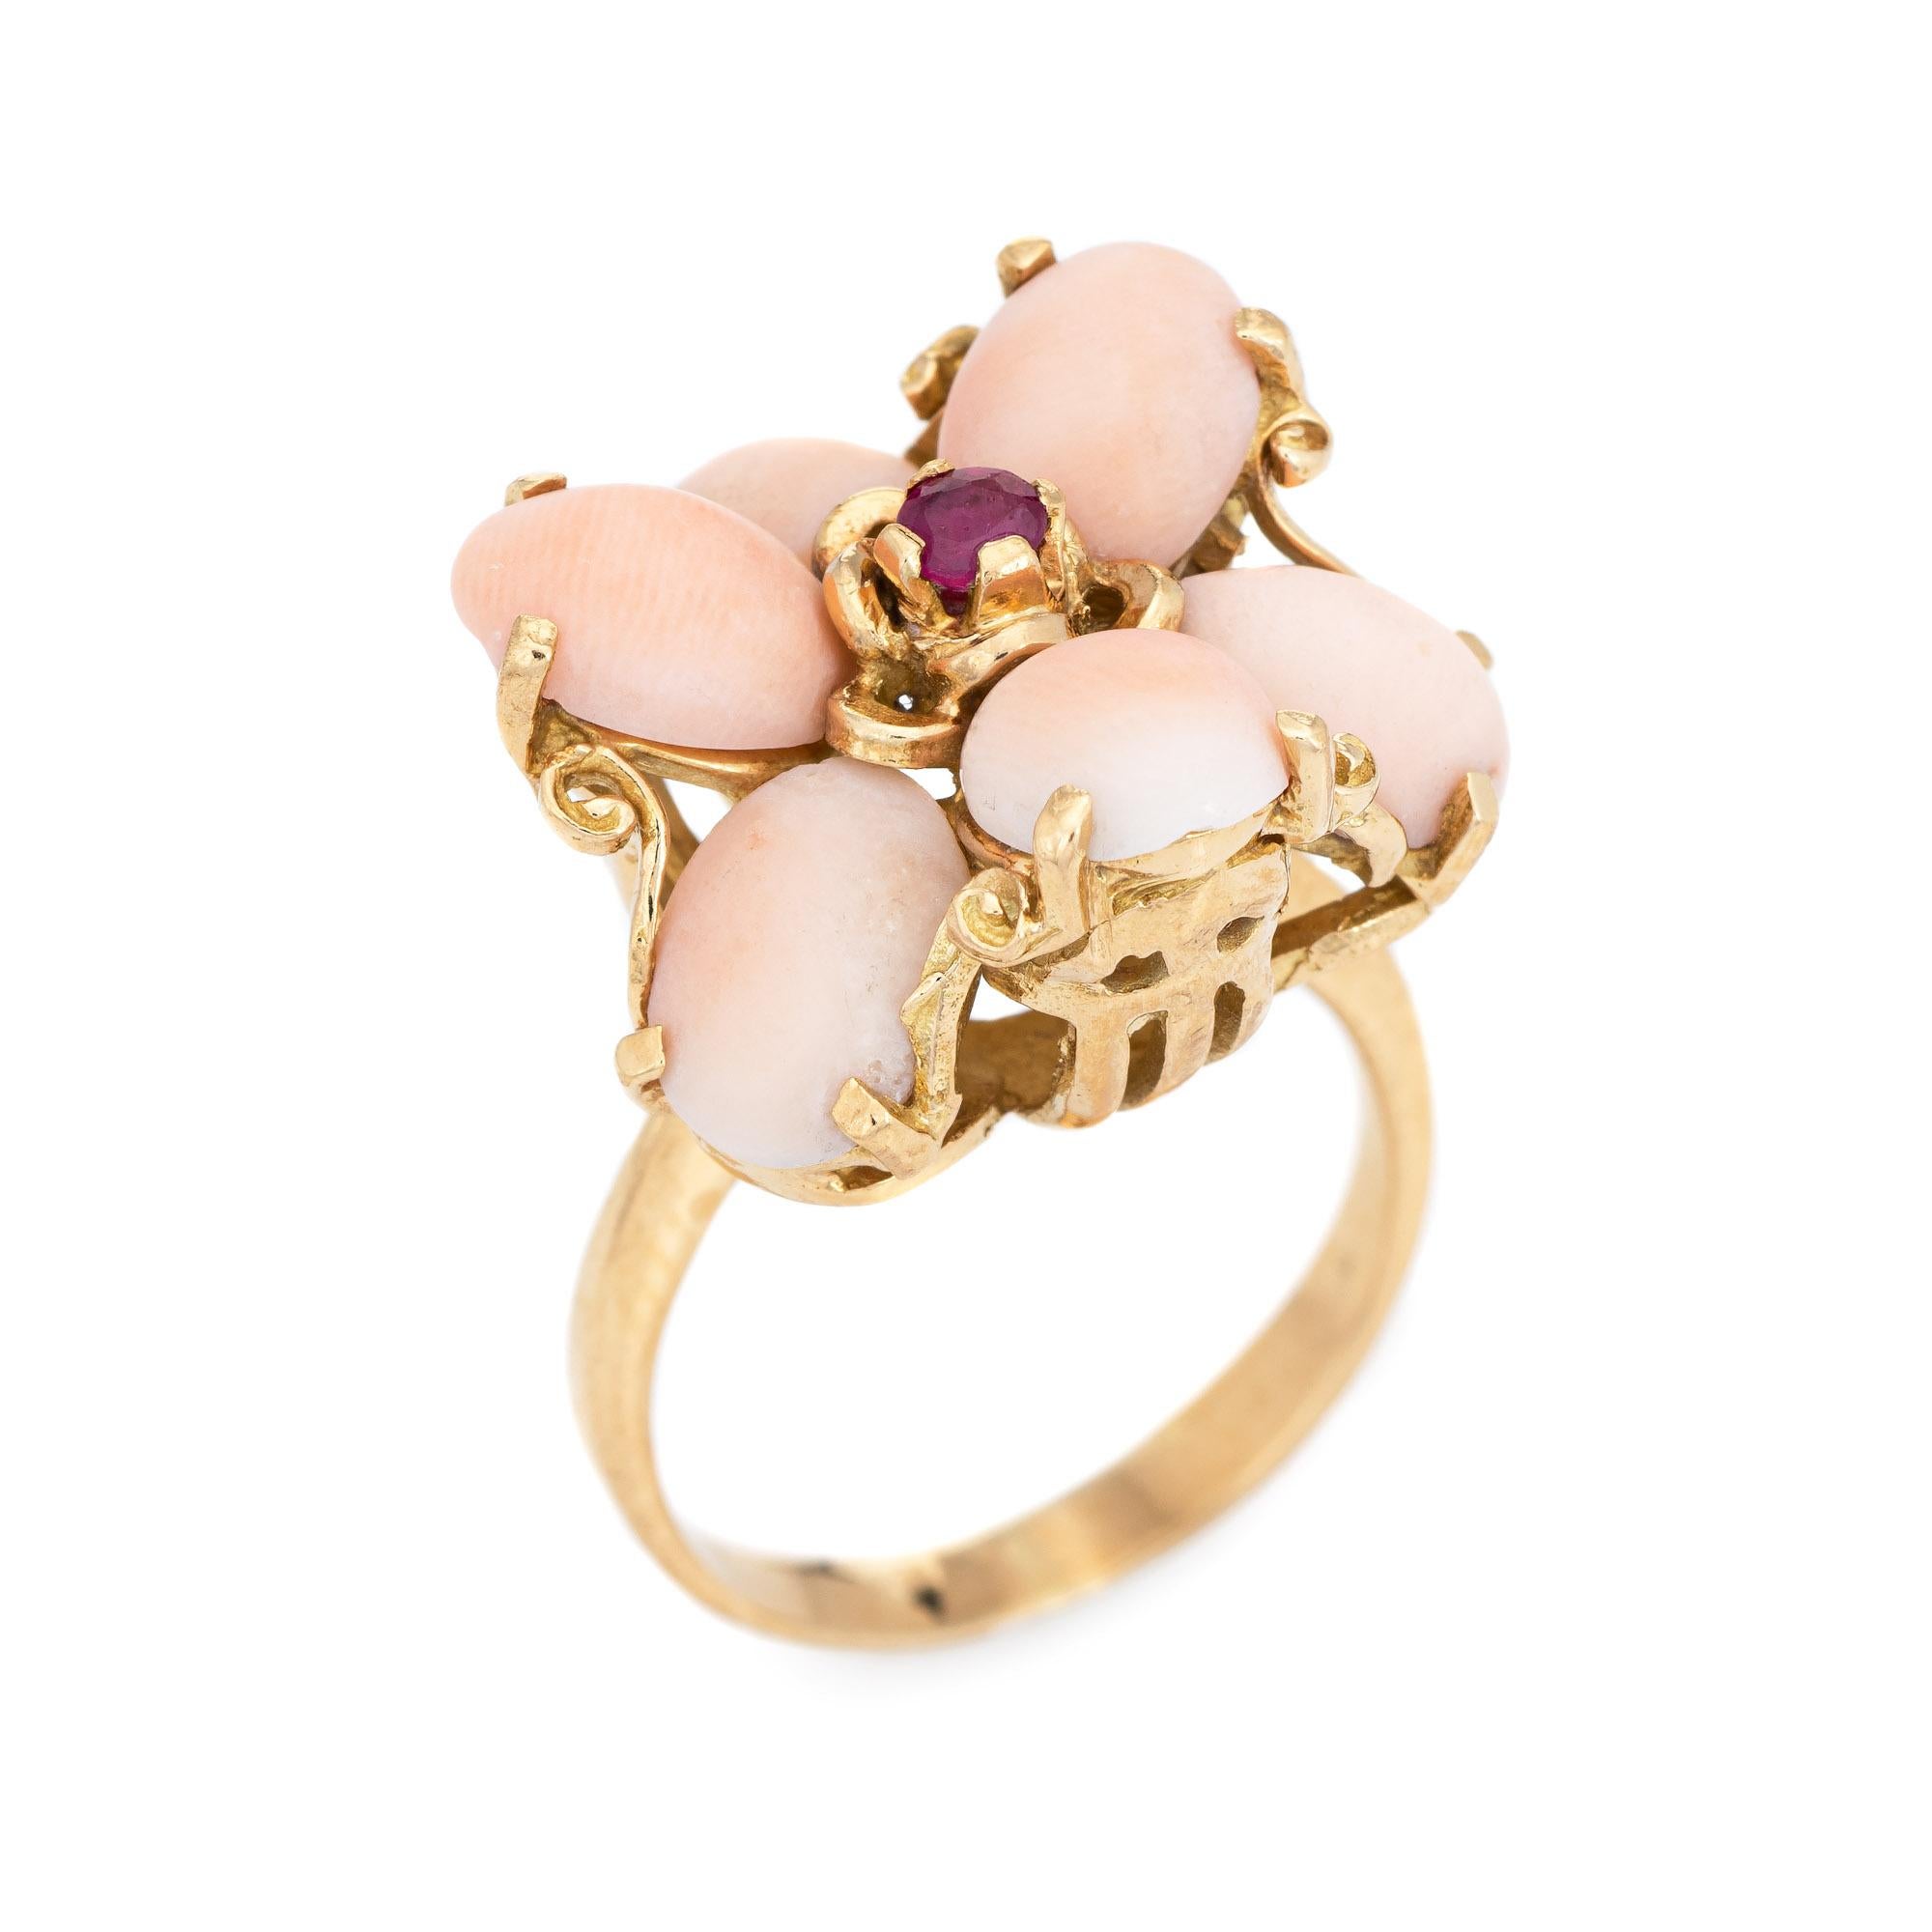 Stylish angel skin coral & ruby flower cocktail ring crafted in 18 karat yellow gold (circa 1970s). 

Cabochon cut coral measures 8mm x 6mm (estimated at 1.25 carats each - 7.50 carats total estimated weight). One estimated 0.05 carat ruby is set to